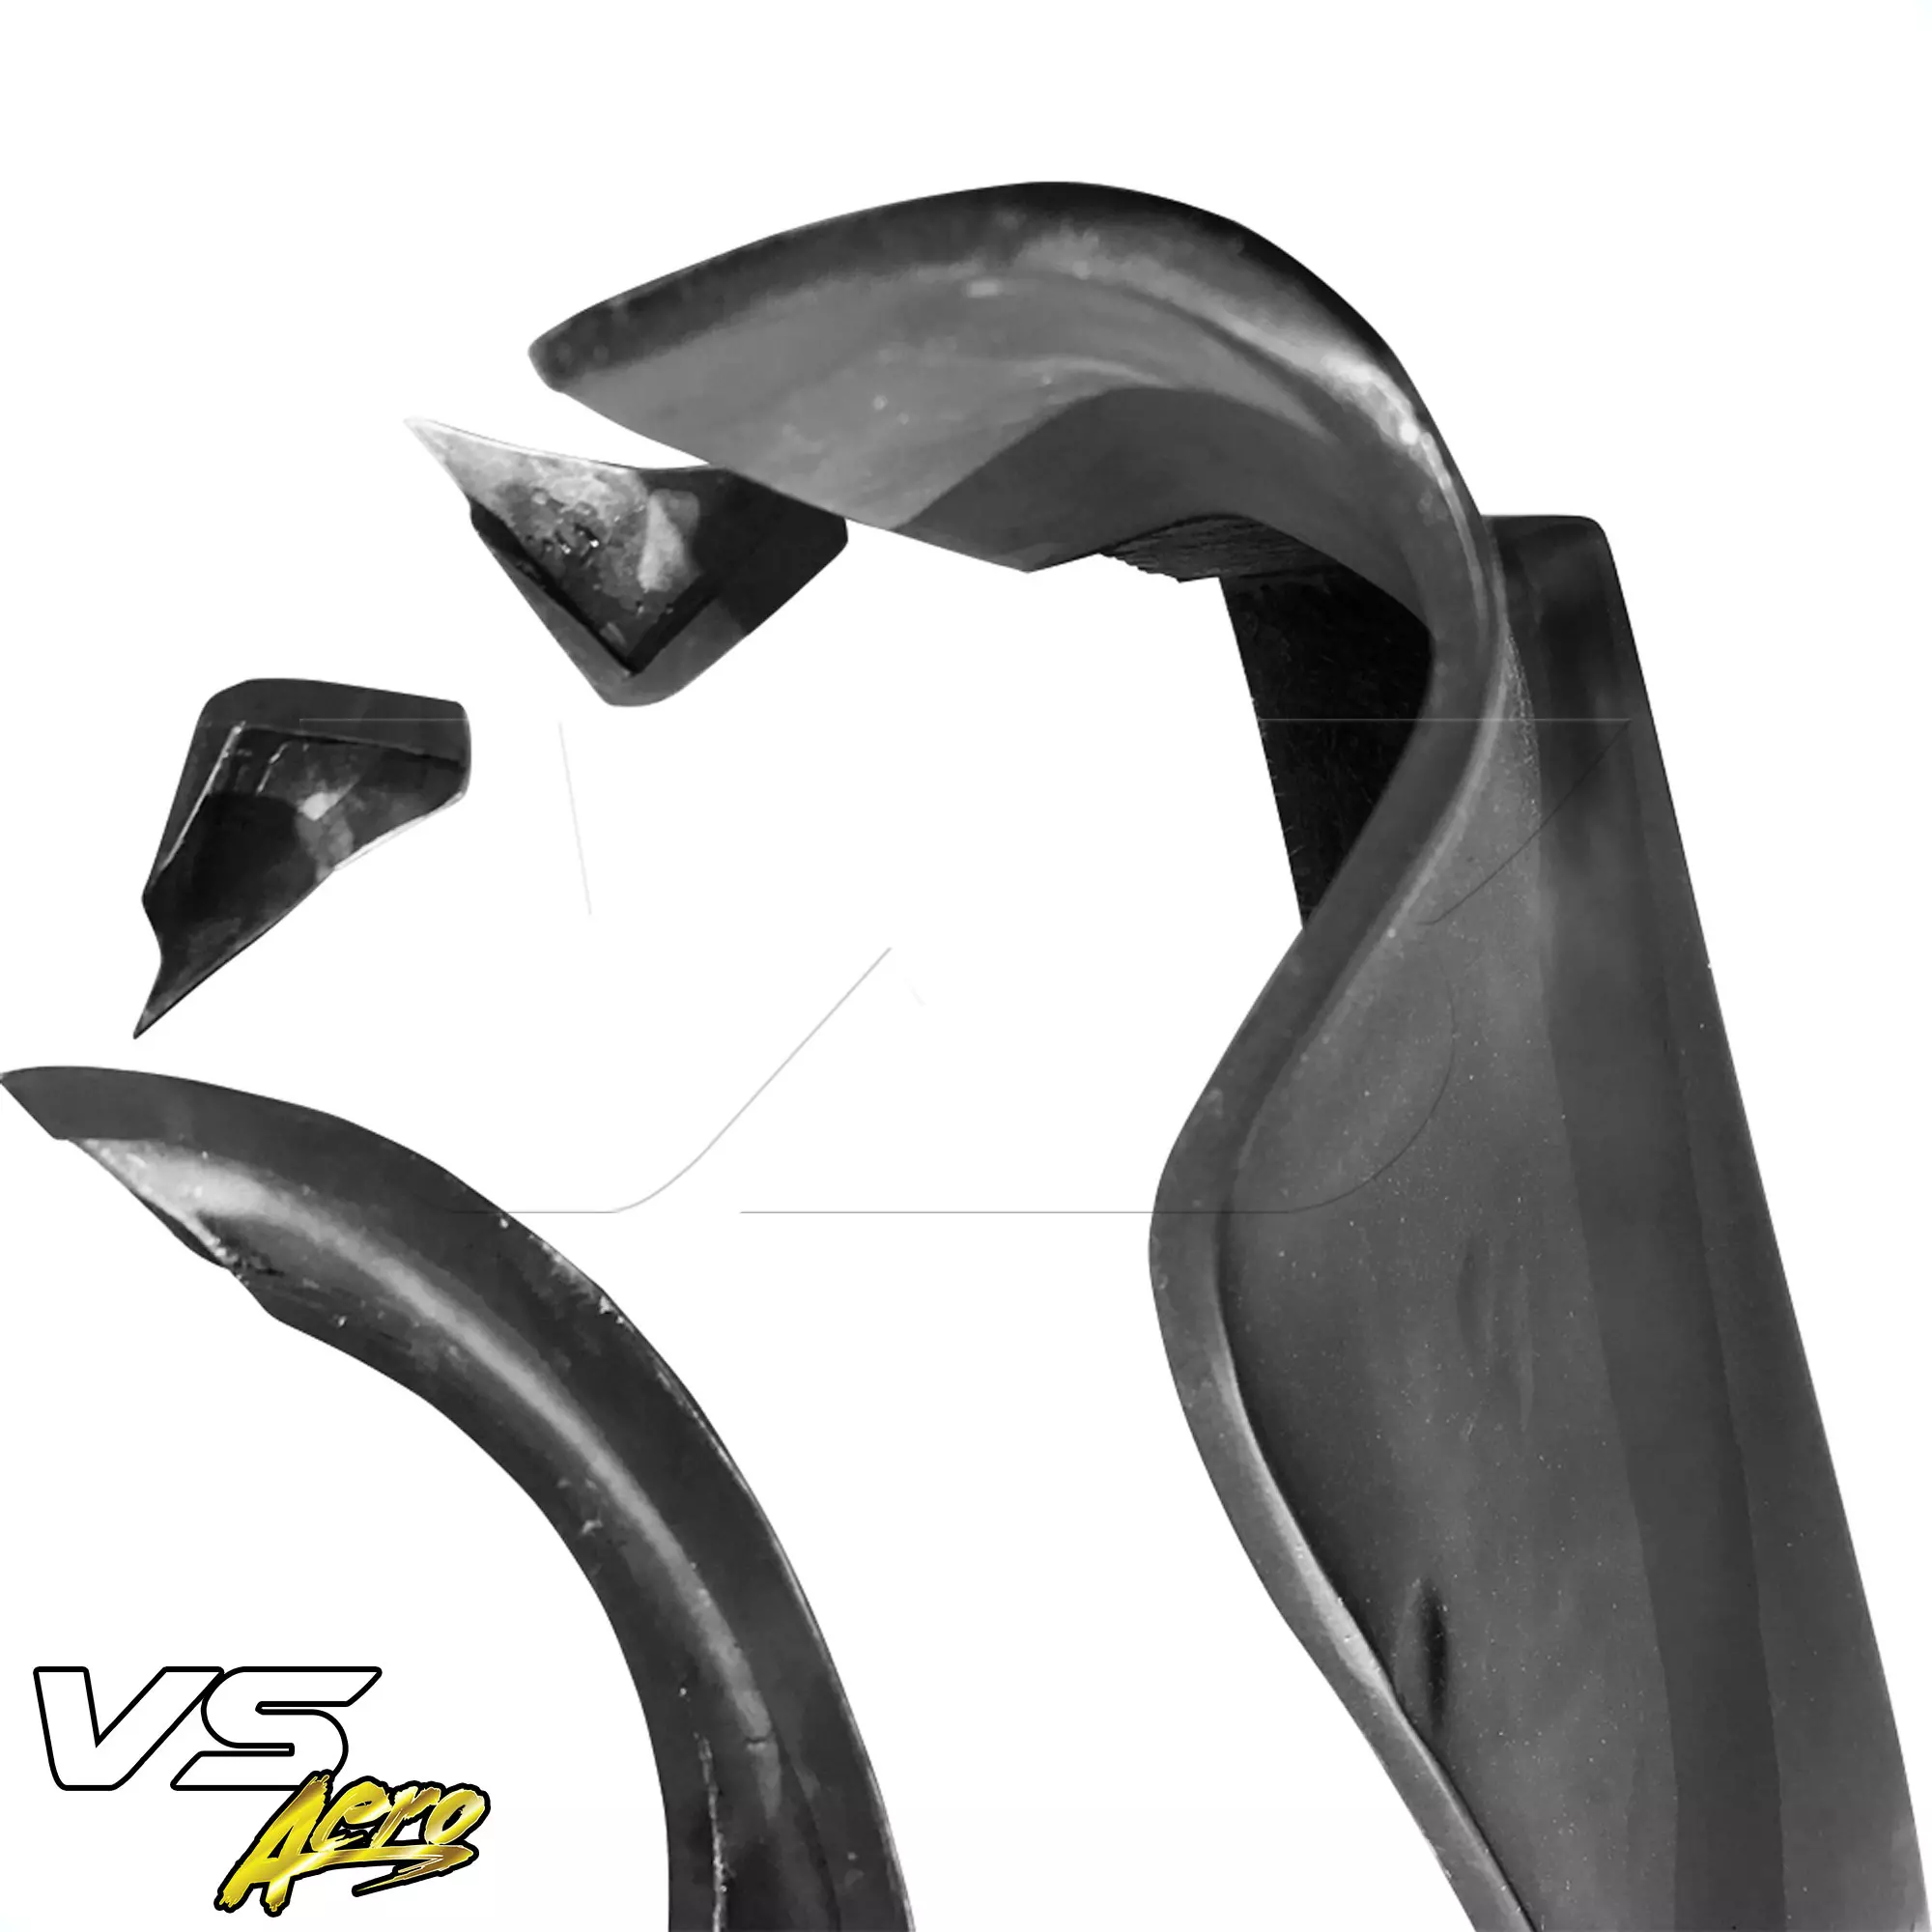 VSaero FRP LBPE Wide Body Fender Flares (front) 4pc > Infiniti G37 Coupe 2008-2015 > 2dr Coupe - Image 20